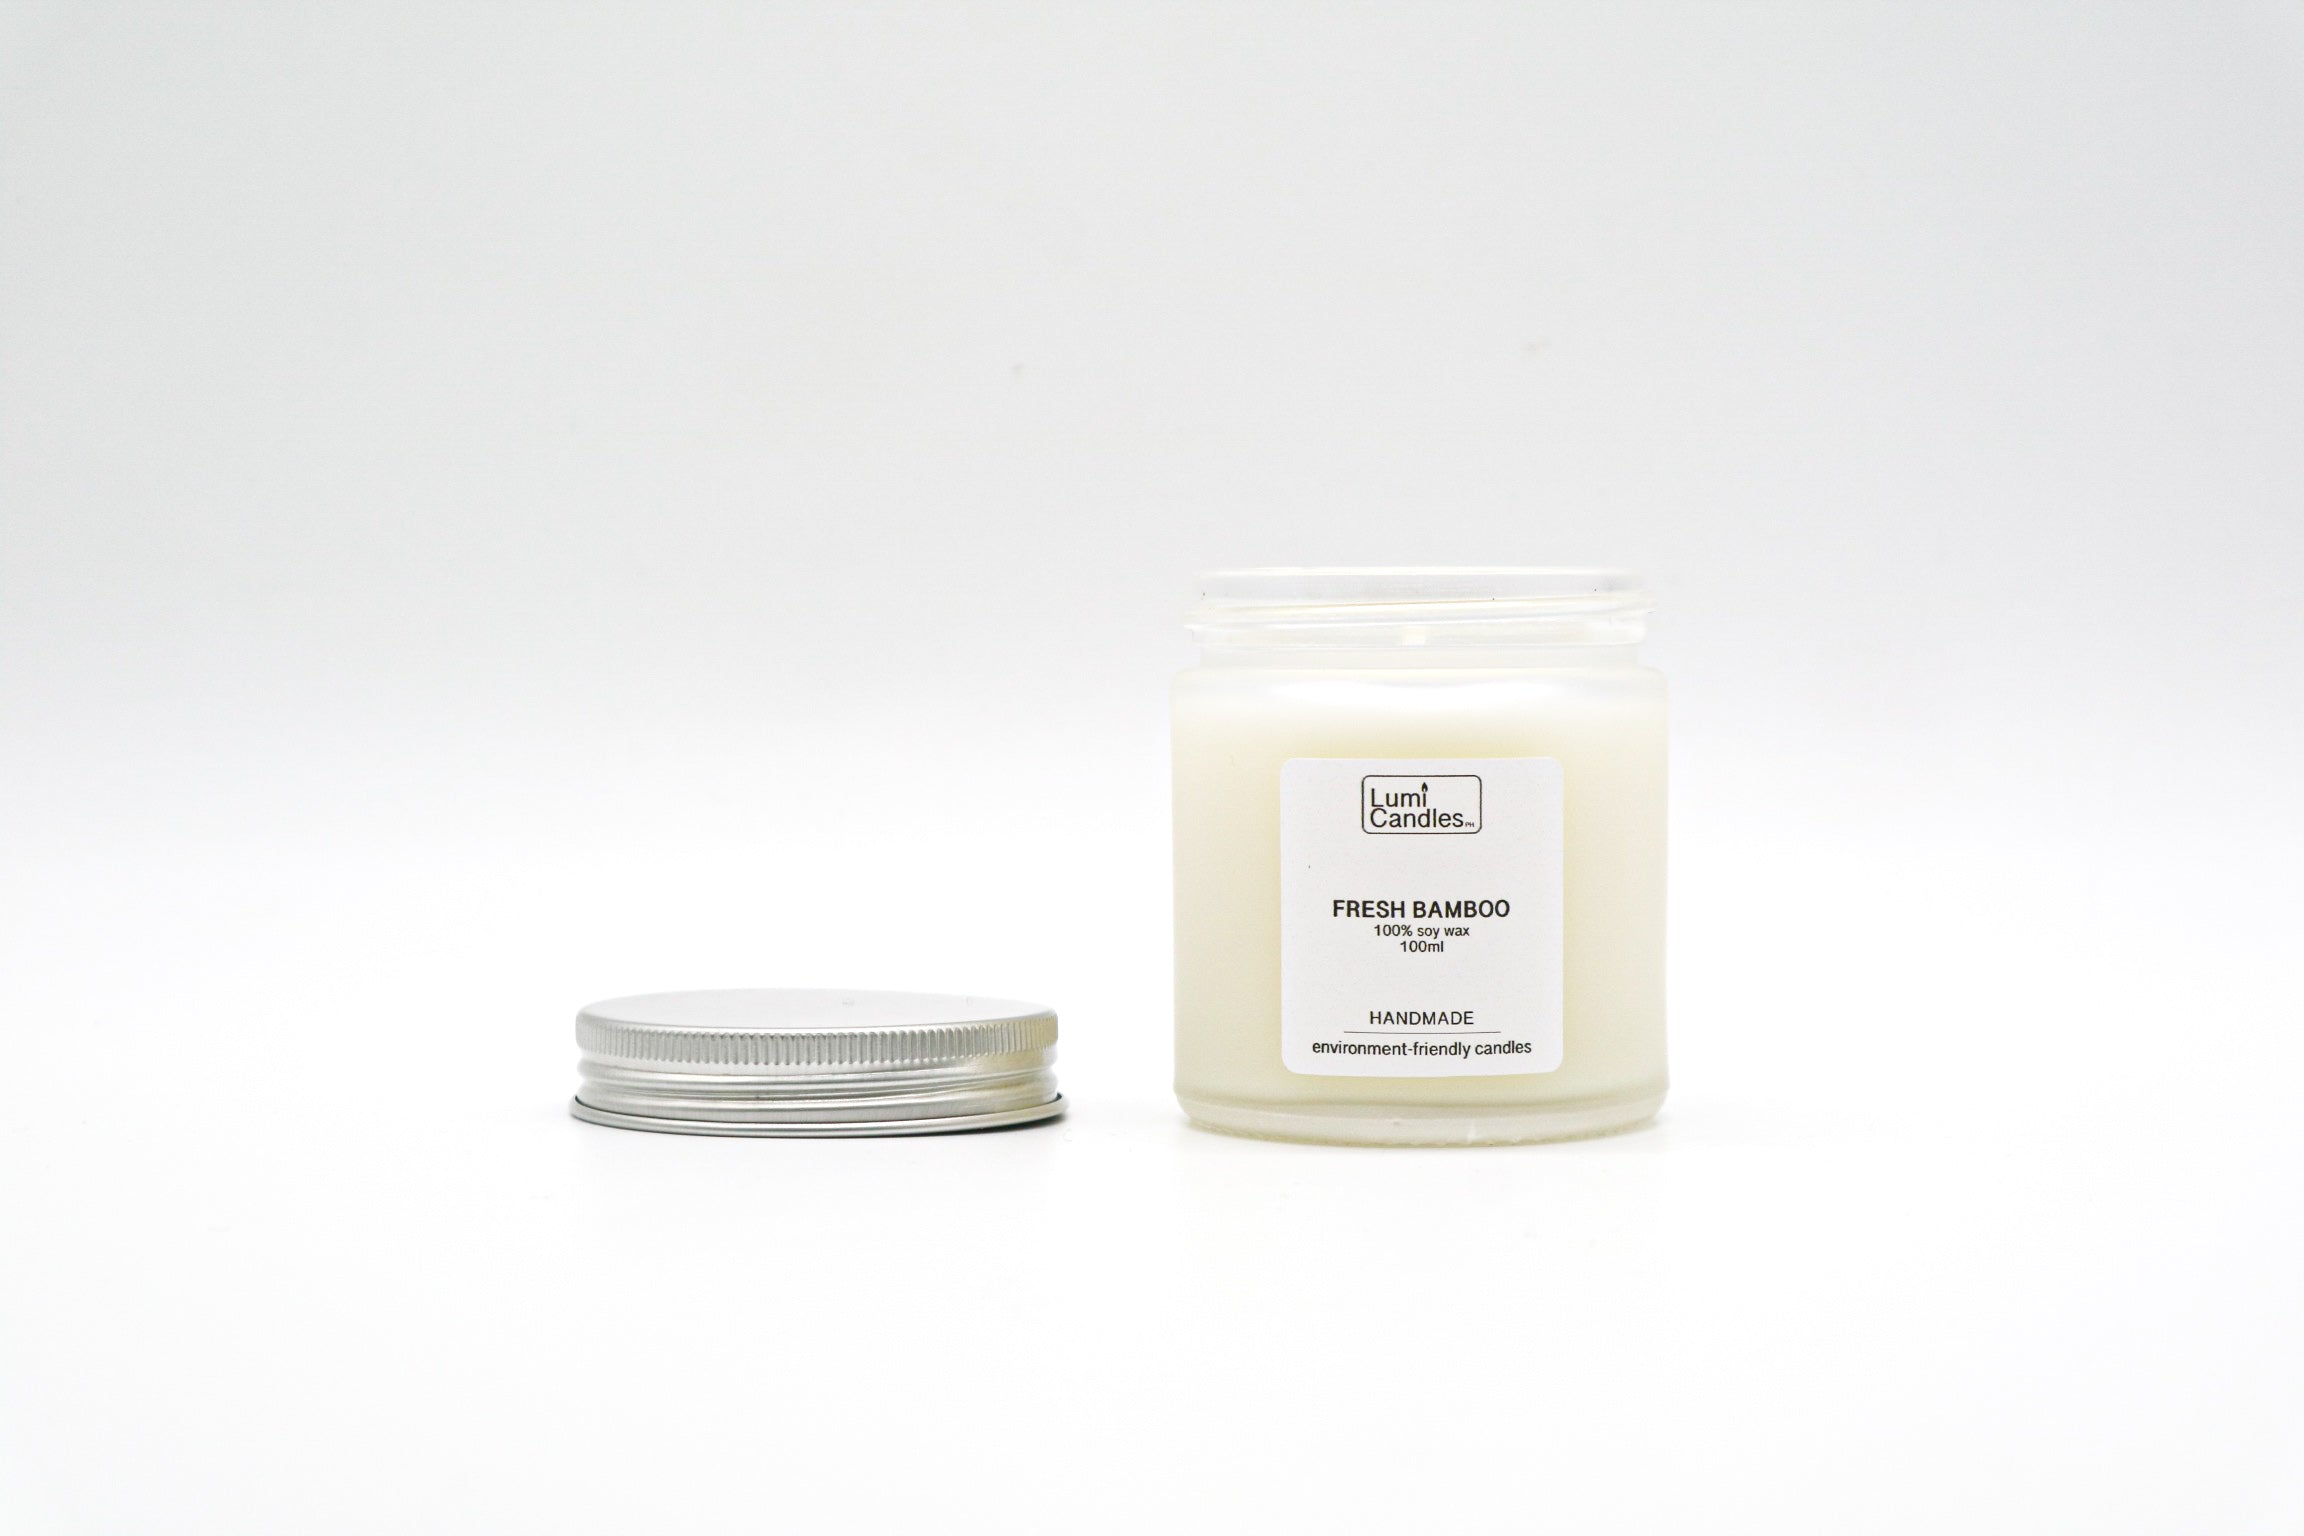 Fresh Bamboo Scented Soy Candle (100 ml) - Lumi Candles PH